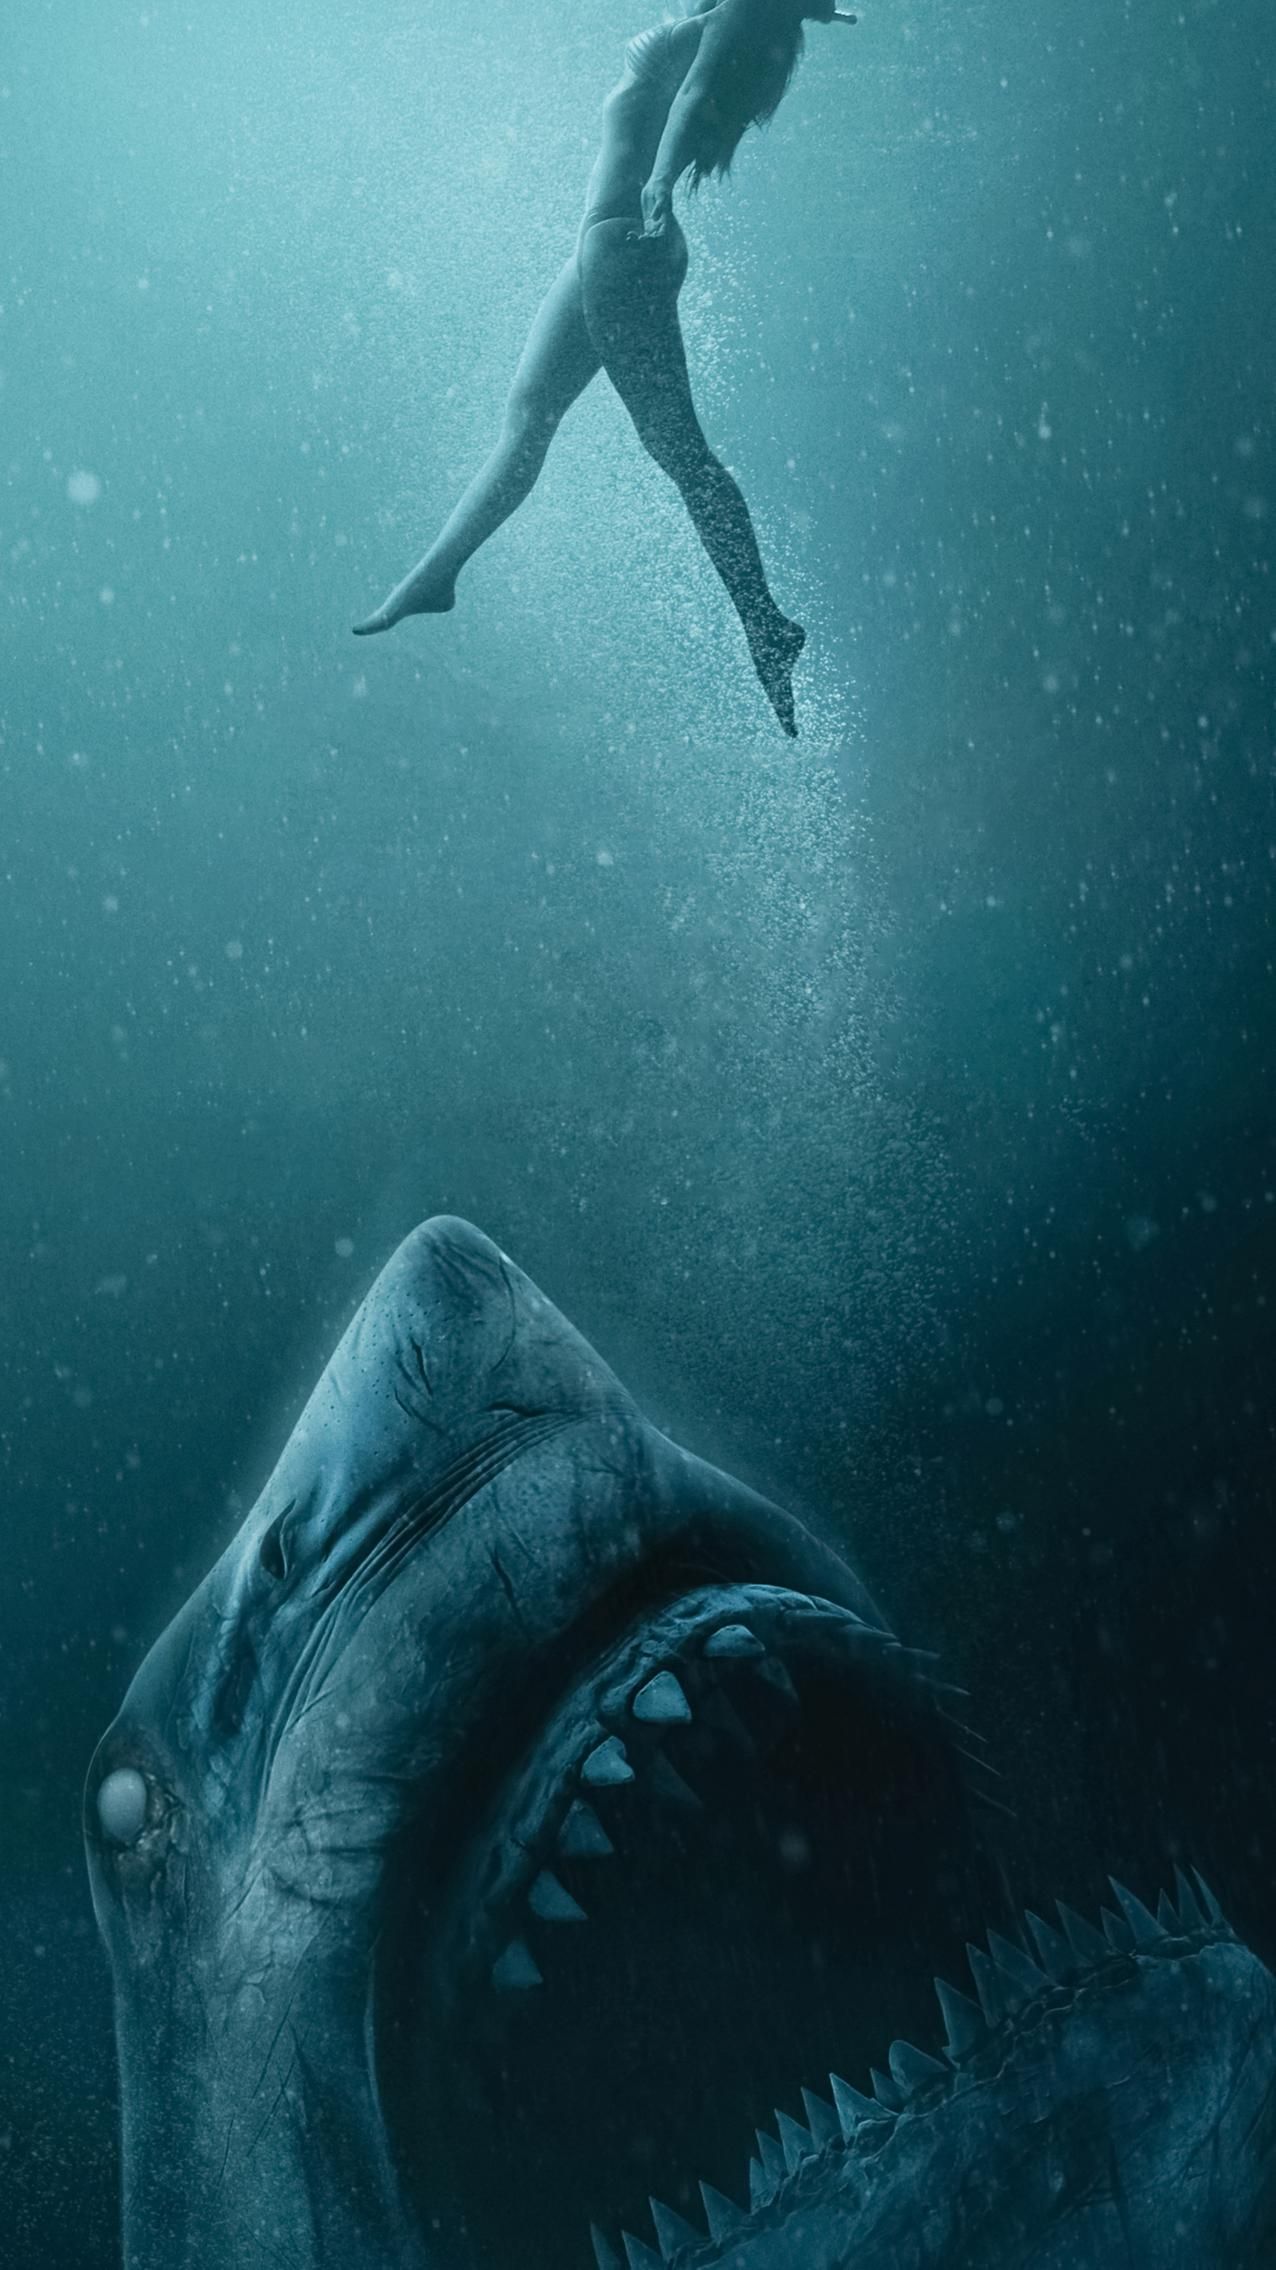 New Phone Wallpaper. Moviemania. Shark picture, Scary ocean, Scary sea creatures